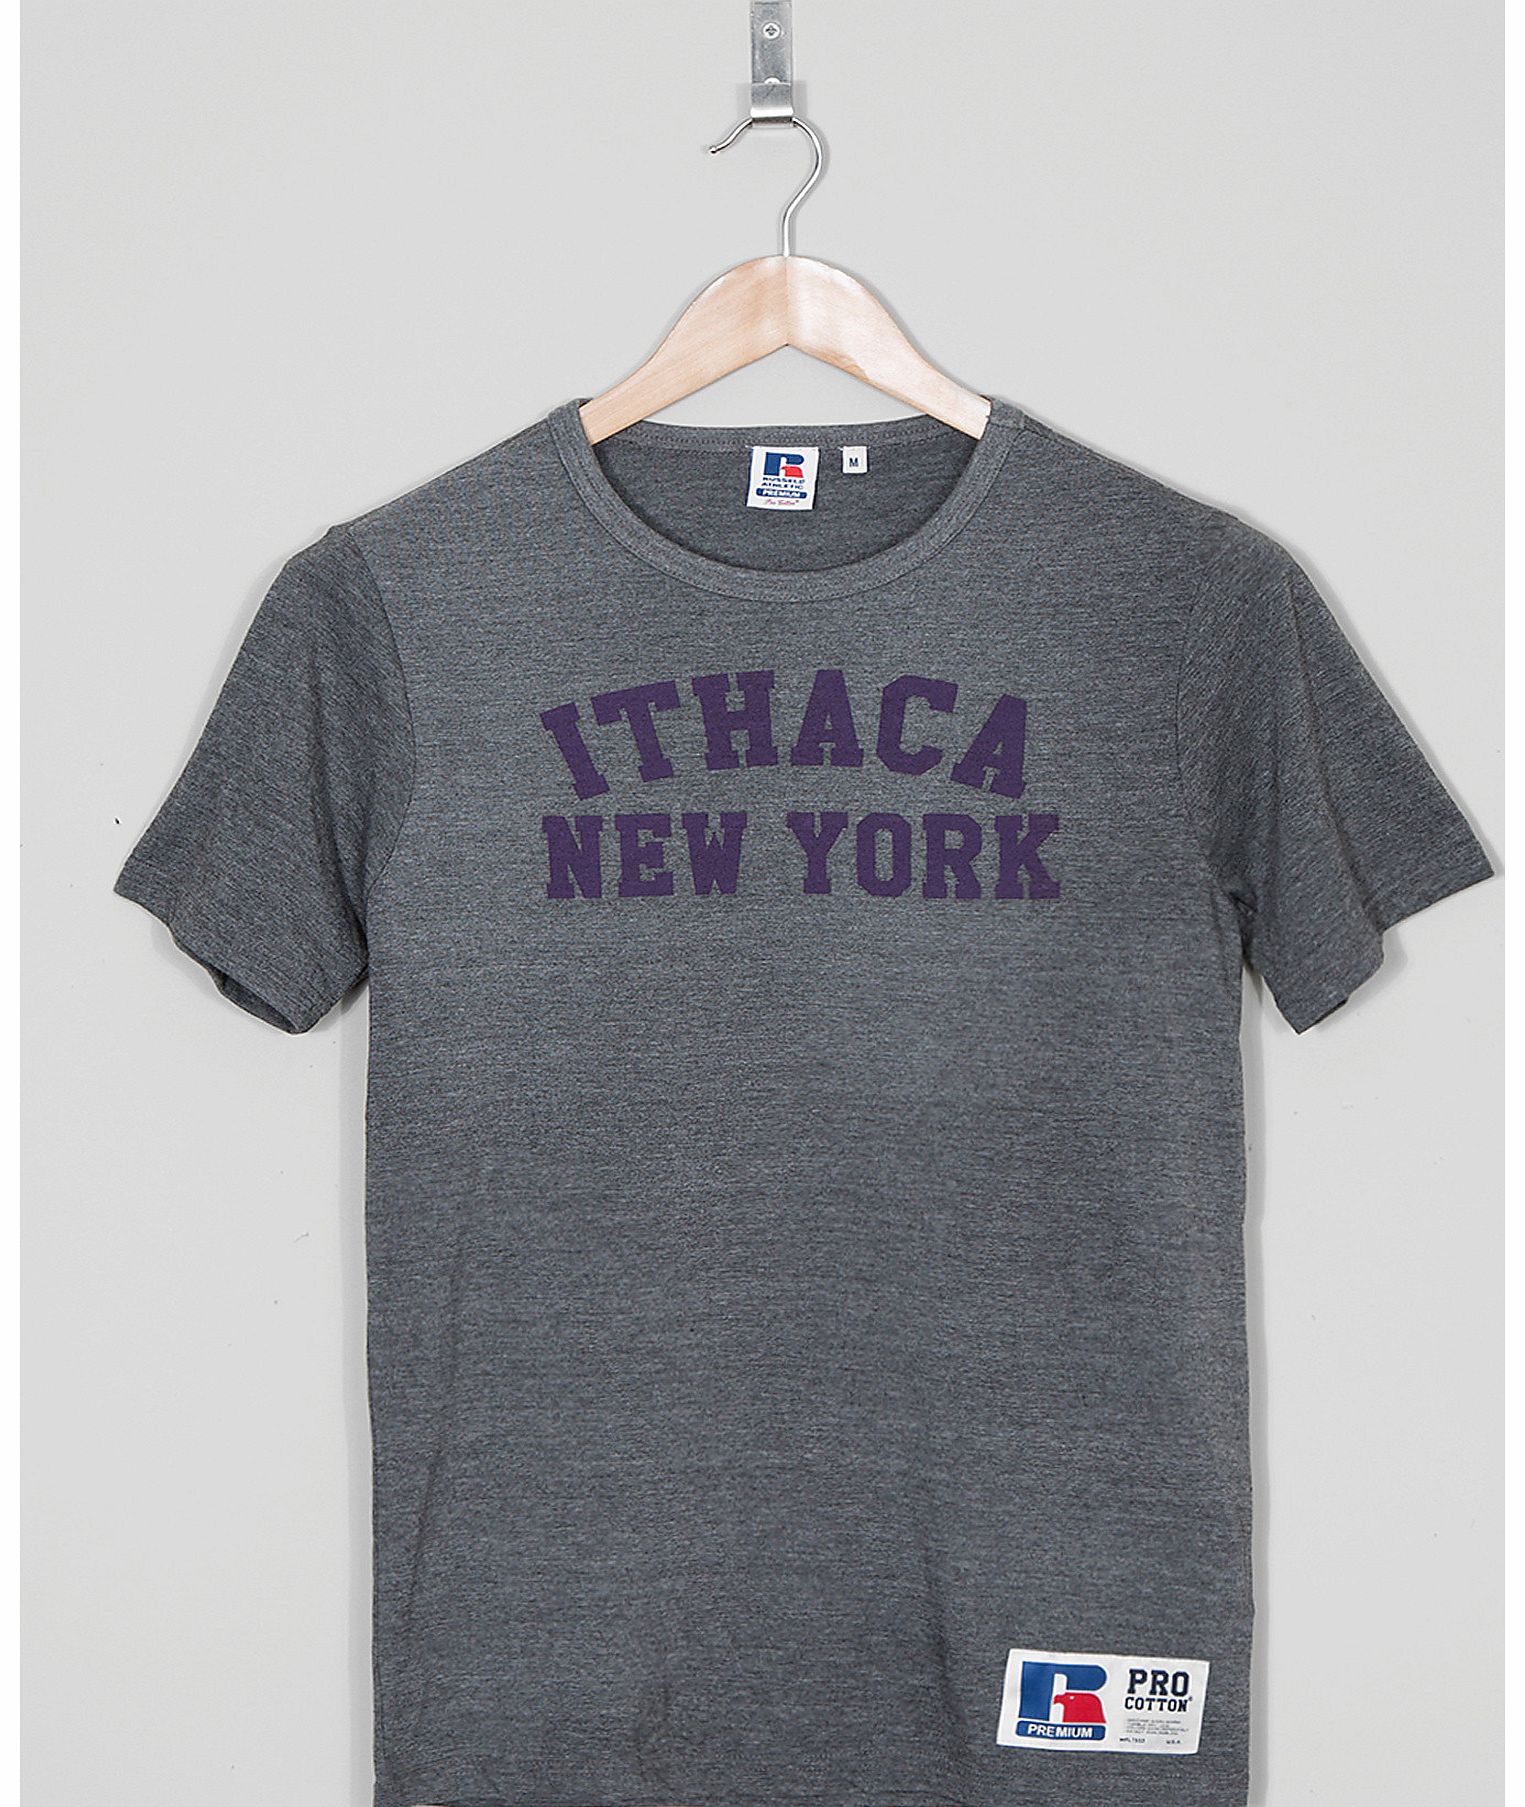 Russell Athletic Ithaca New York T-Shirt